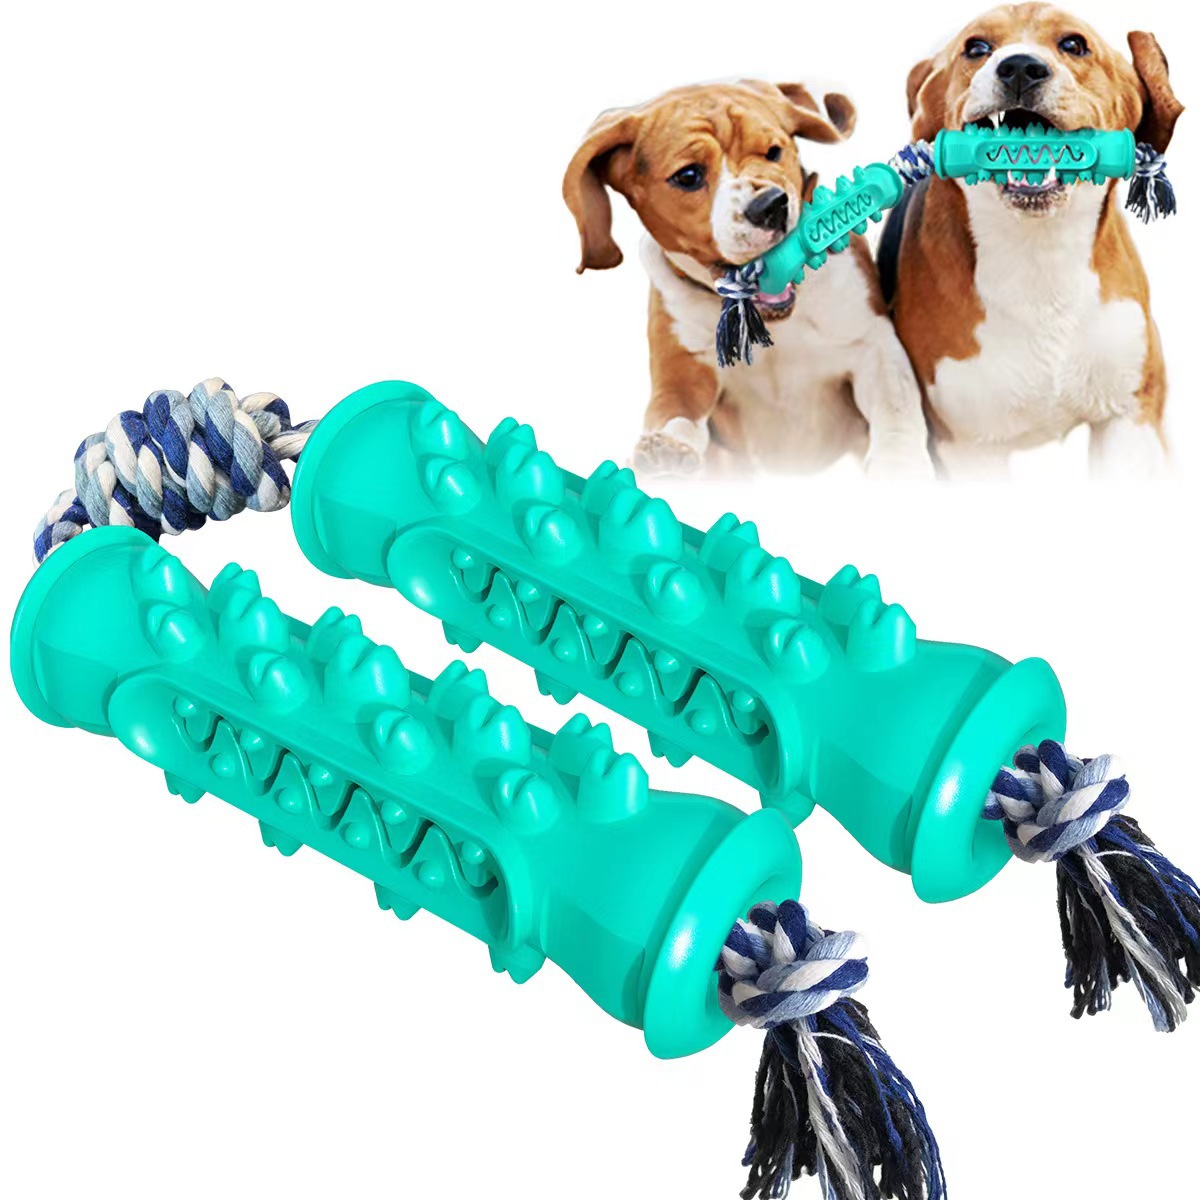 Pet Supplies Amazon Dog Toy Molar Rod Bite-Resistant Tooth Cleaning Bone-Head Dog Toothbrush Toy Munchkin Soothing Chews Serrated